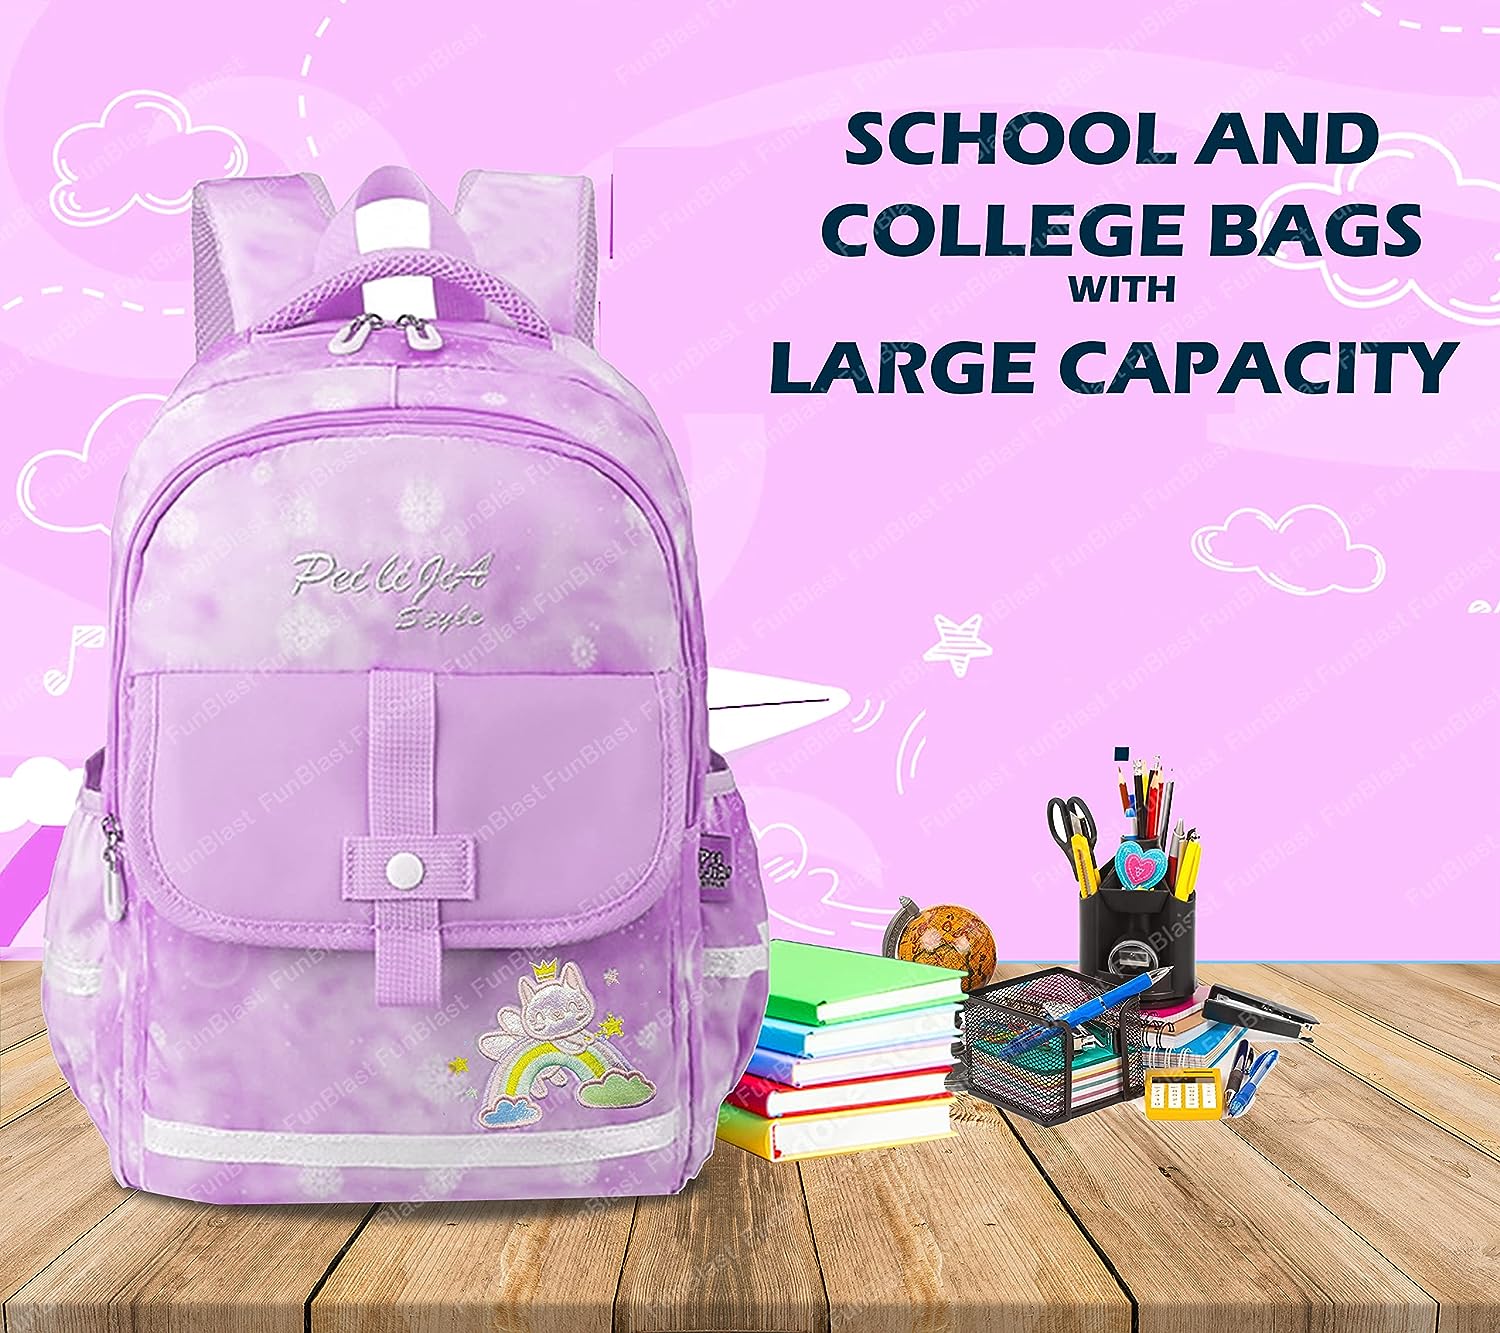 Unicorn Backpack for Children - School Bag for Student, School and College Bags, Lightweight Large Capacity Bag for Boys Girls Kids, Travel Bag, Picnic Bag (42 X 29 X 18 CM)